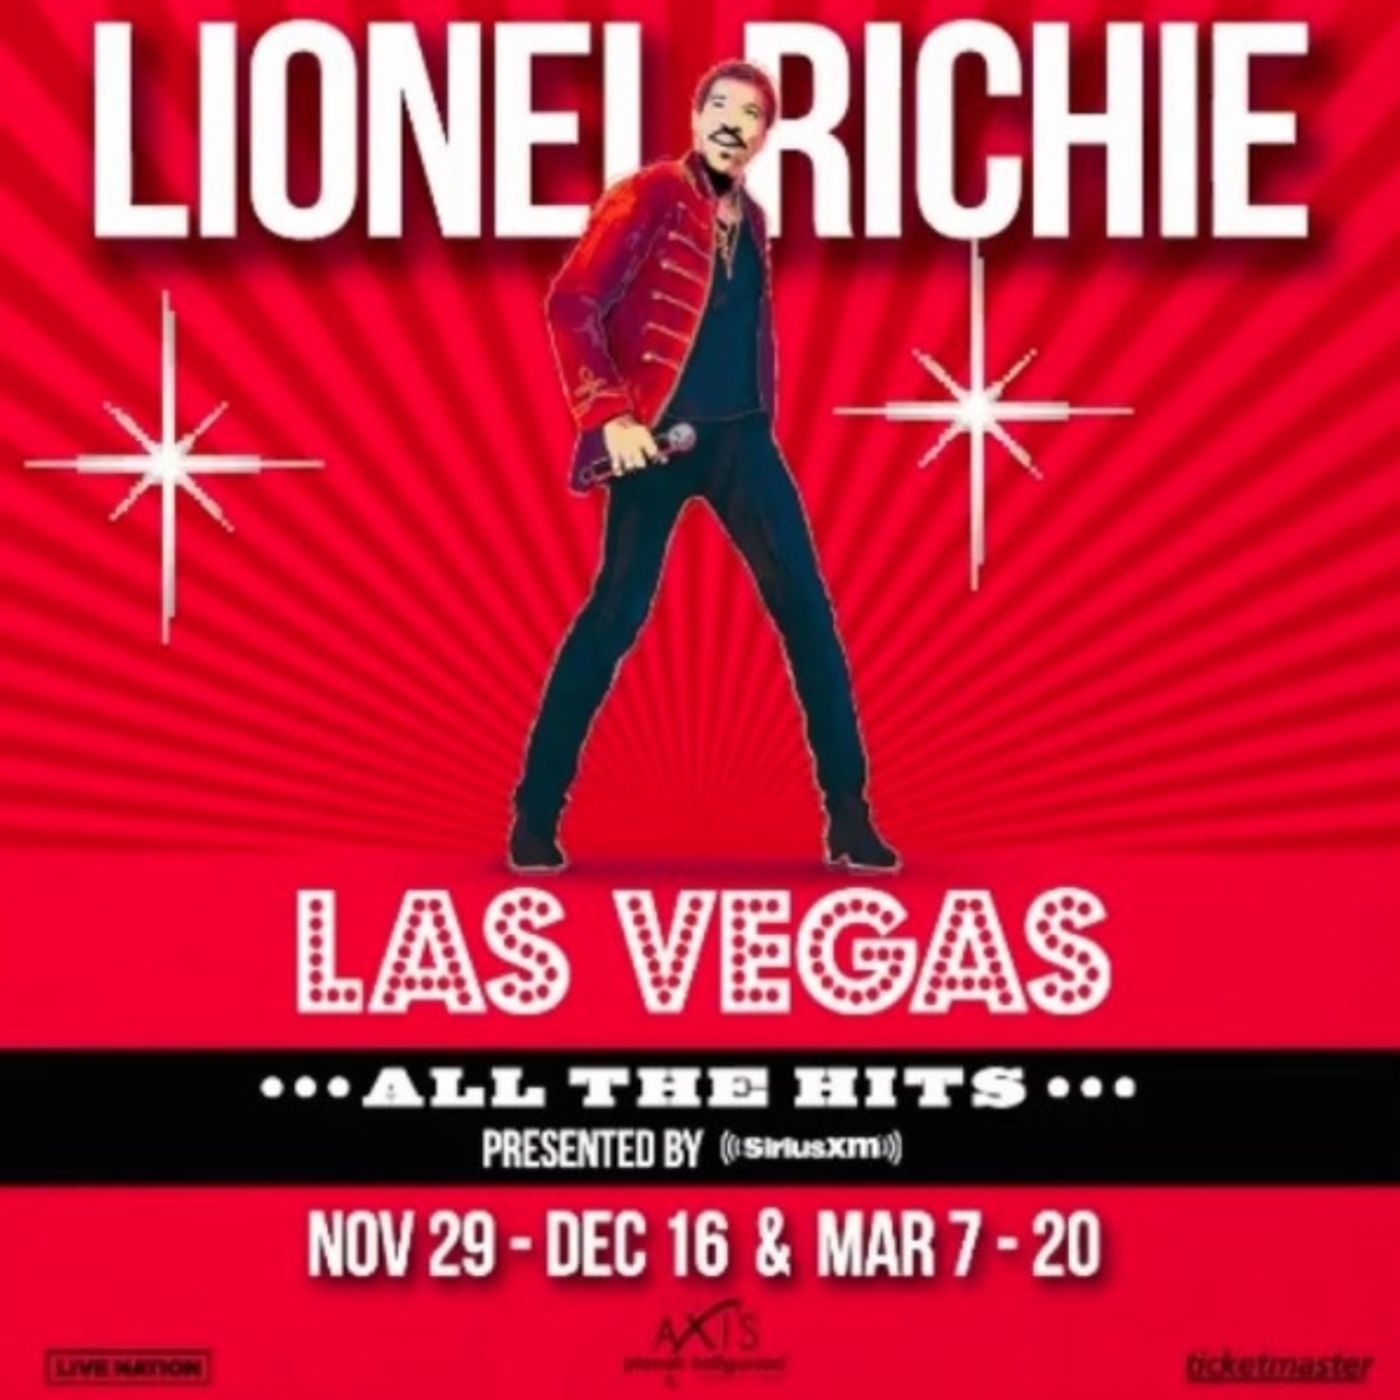 Lionel Richie Heading Back To Vegas Shows